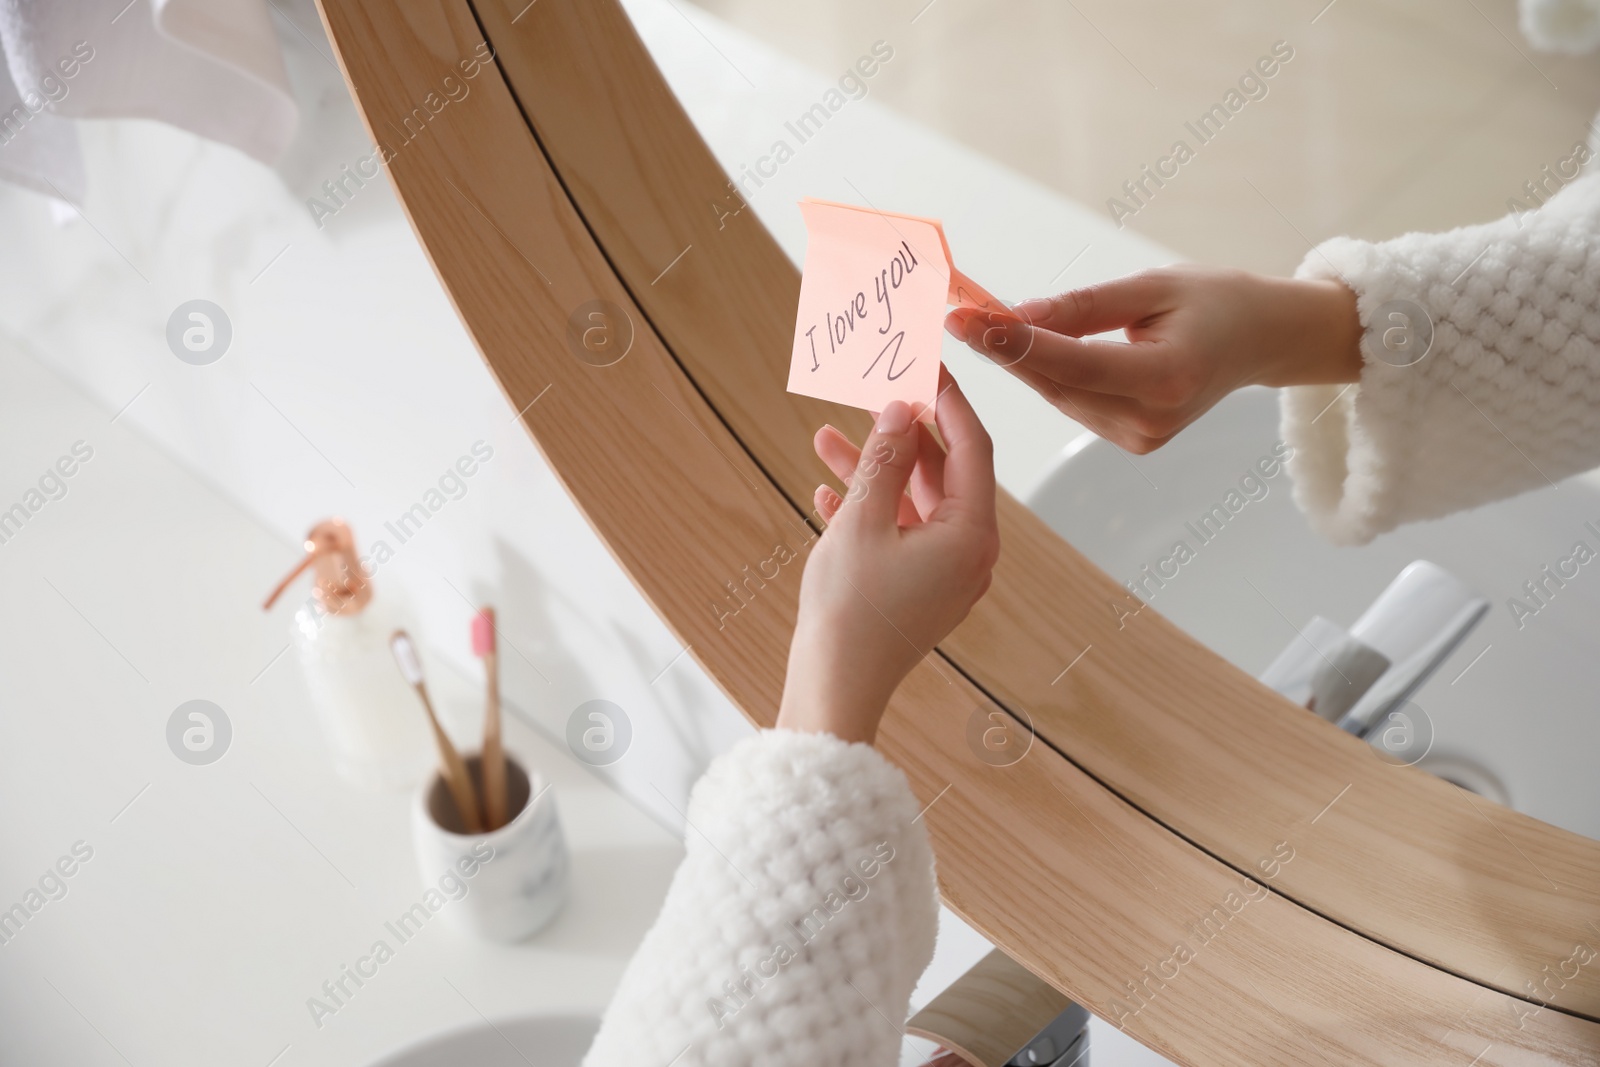 Photo of Woman with sticky note saying I Love You near mirror in bathroom, closeup. Romantic message